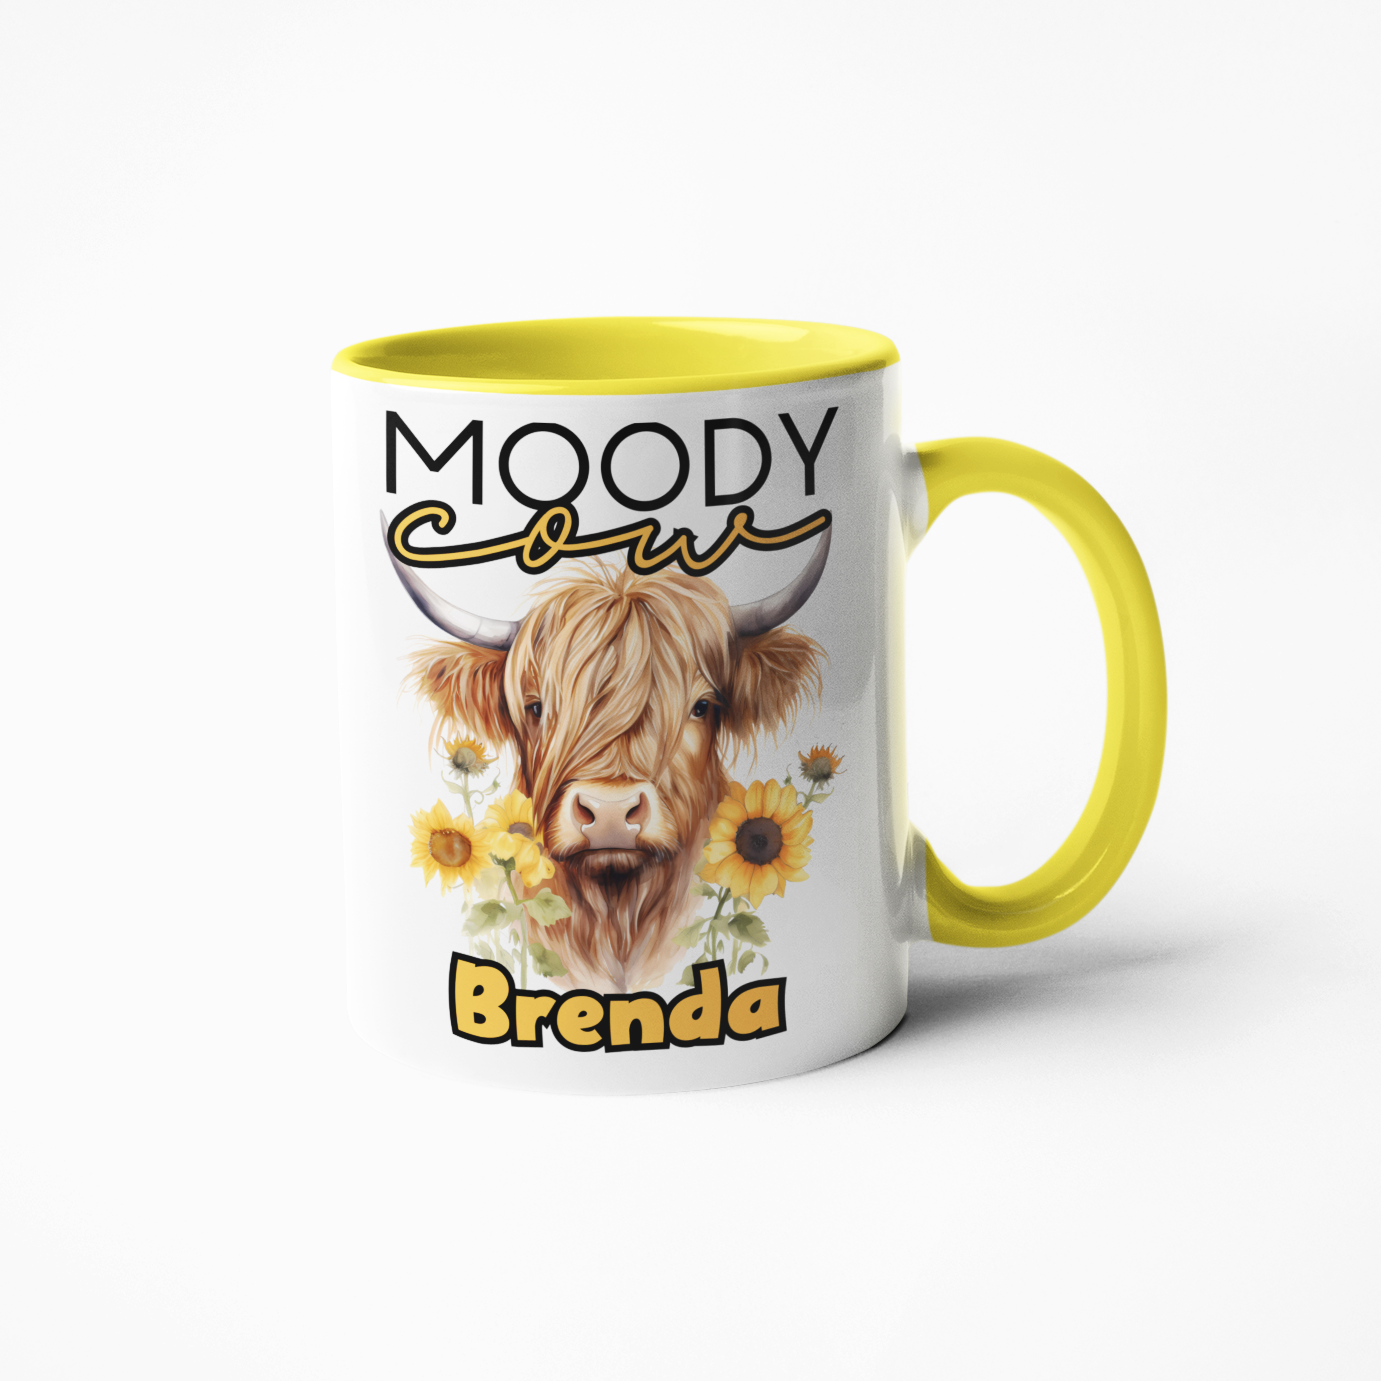 moody highland cow personalised mug with any name gift for birthday or Christmas yellow cup